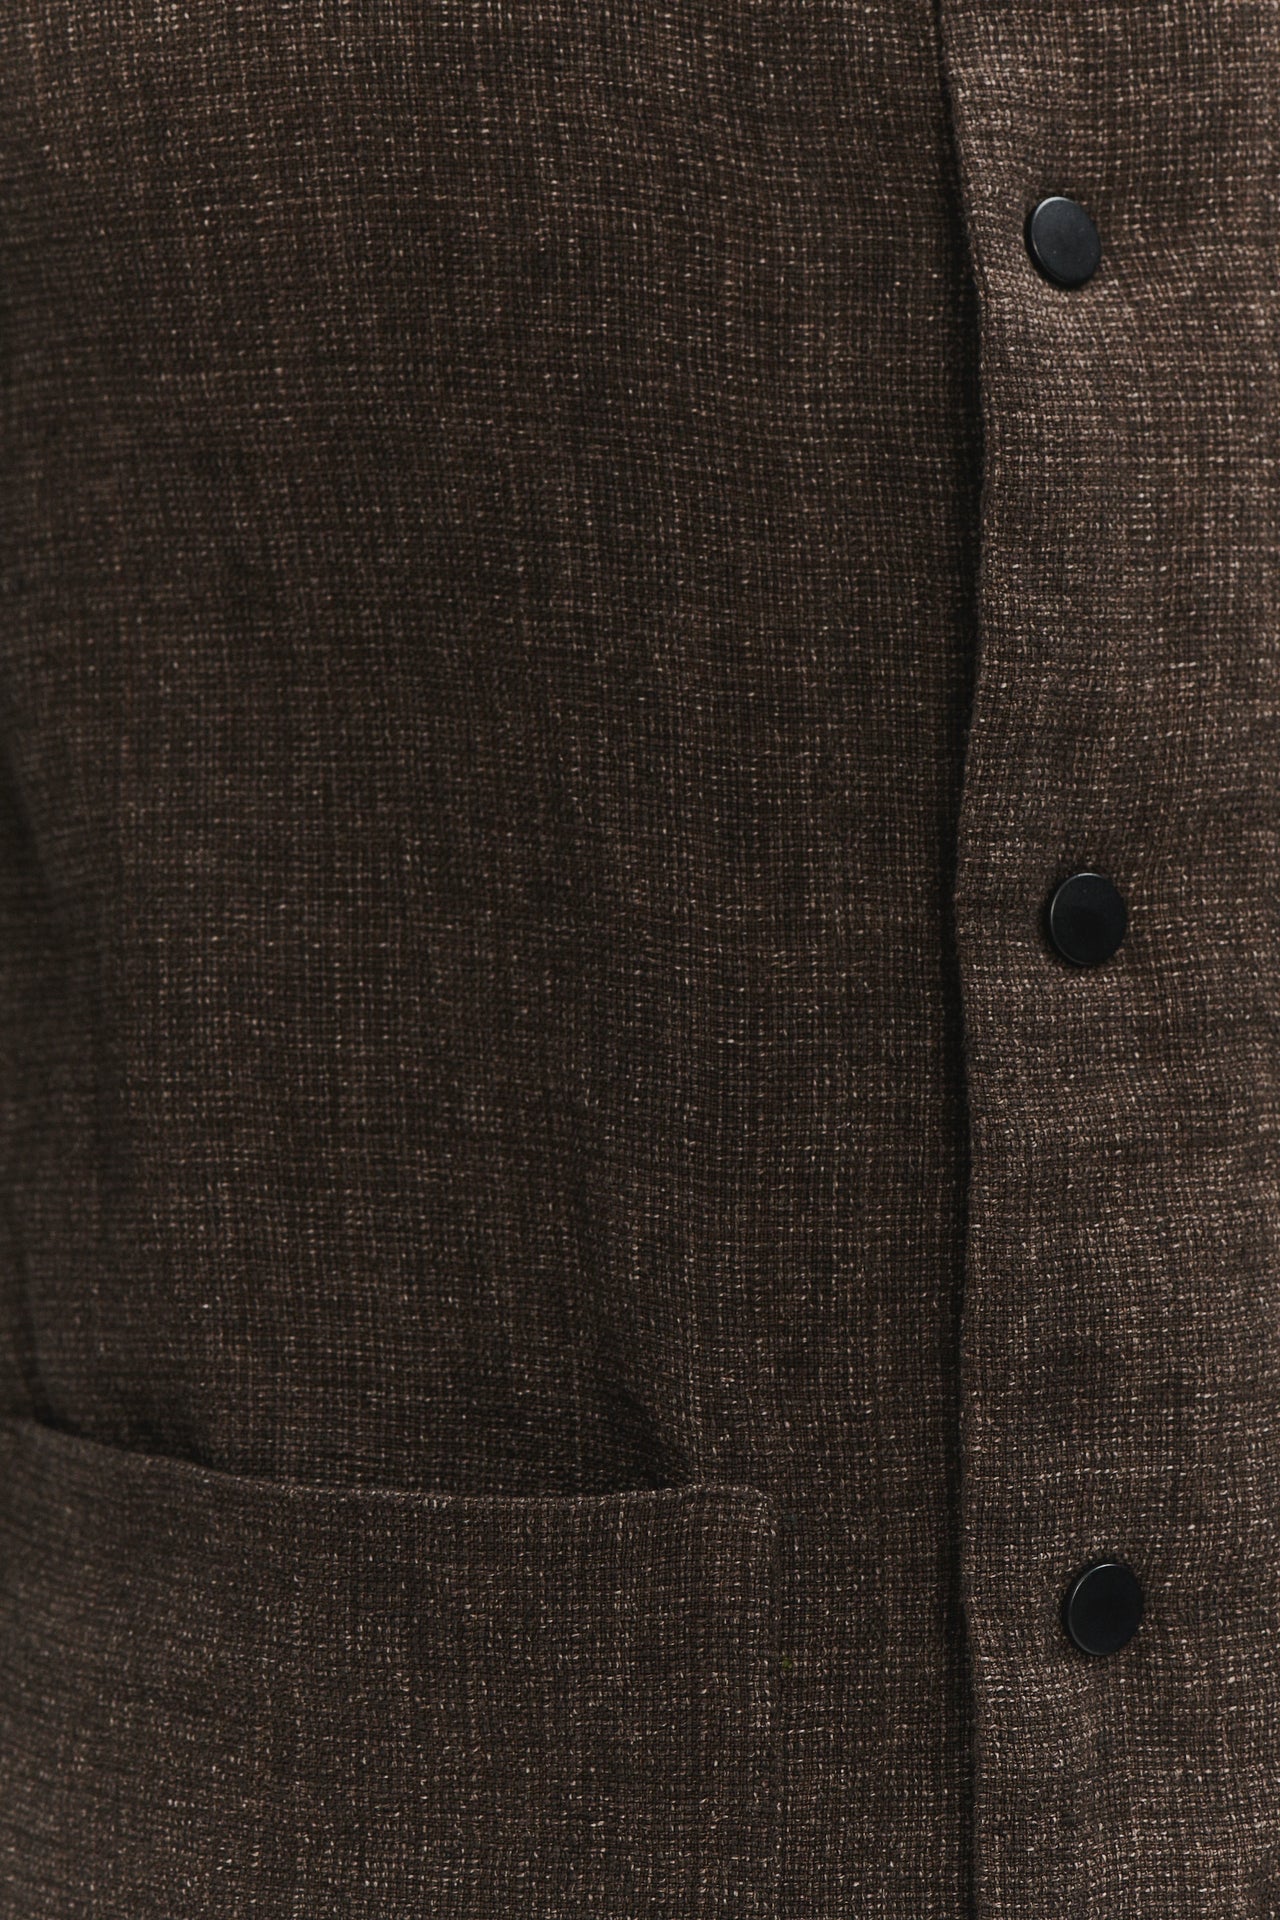 Round Collar Jacket in a Brown Fluid and Structured Italian Linen Crepe